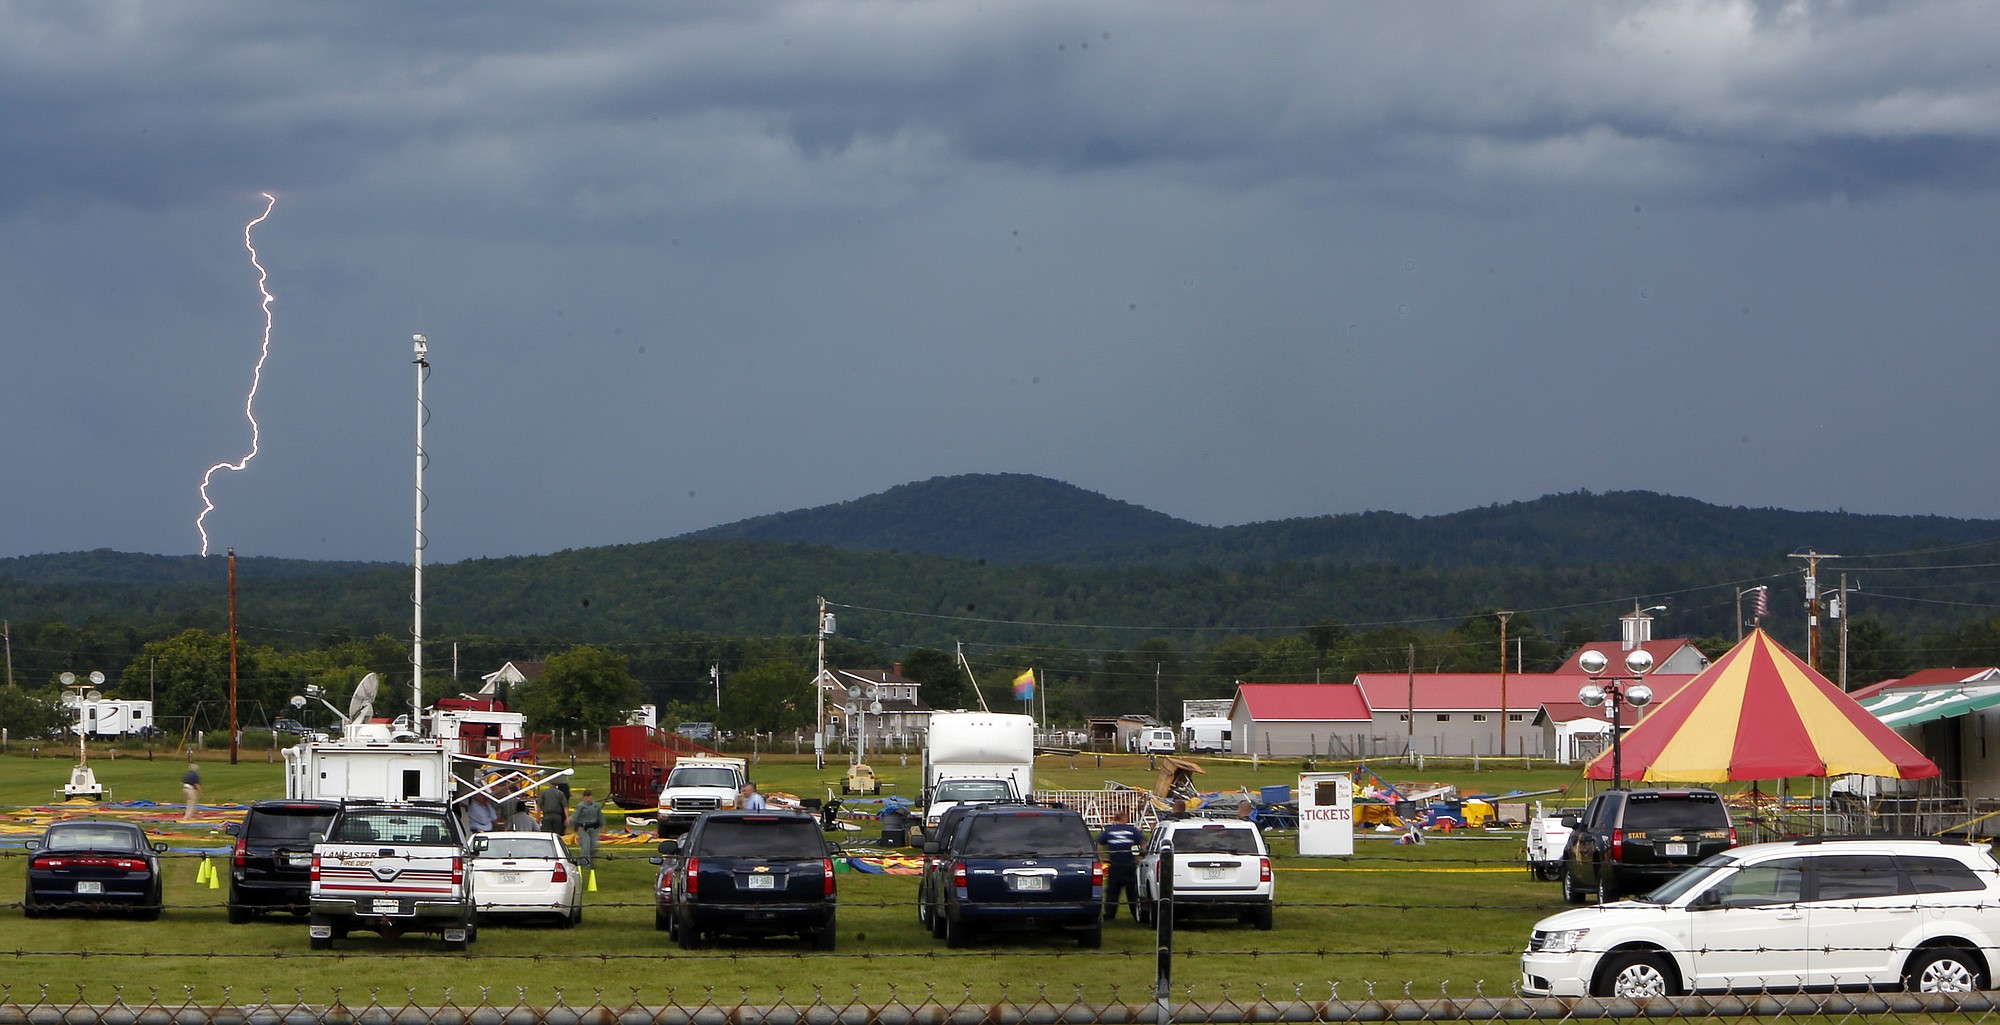 JIM COLE/Associated Press
A storm moves in Tuesday in Lancaster, N.H., as investigators inspect the site of a circus tent that collapsed Monday during a show by the Walker Brothers International Circus.